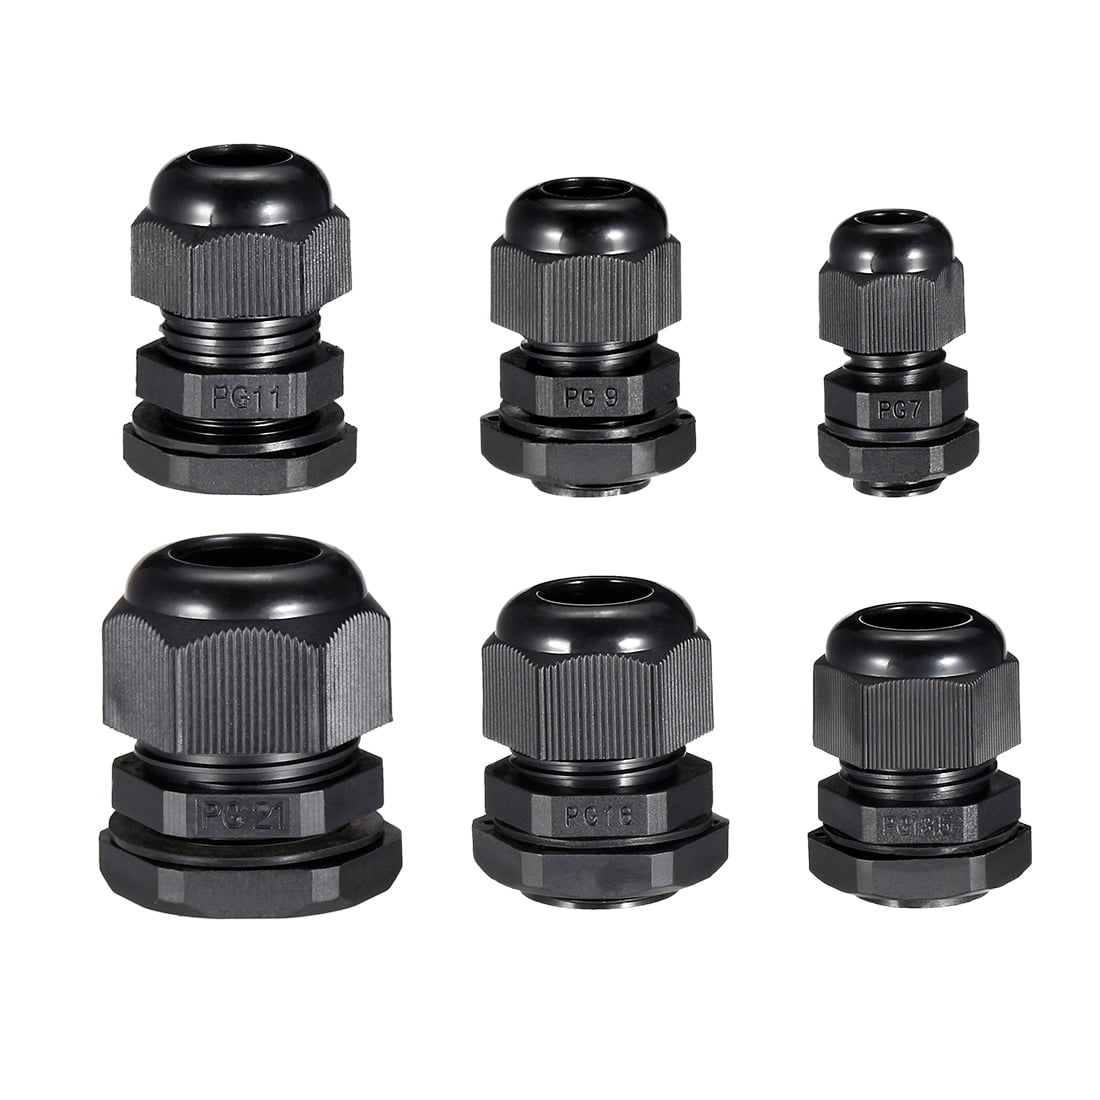 Pack of 5 uxcell Cable Gland PG11 Metal Waterproof Cable Glands Joints Adjustable Connector for 5-10mm Dia Cable 